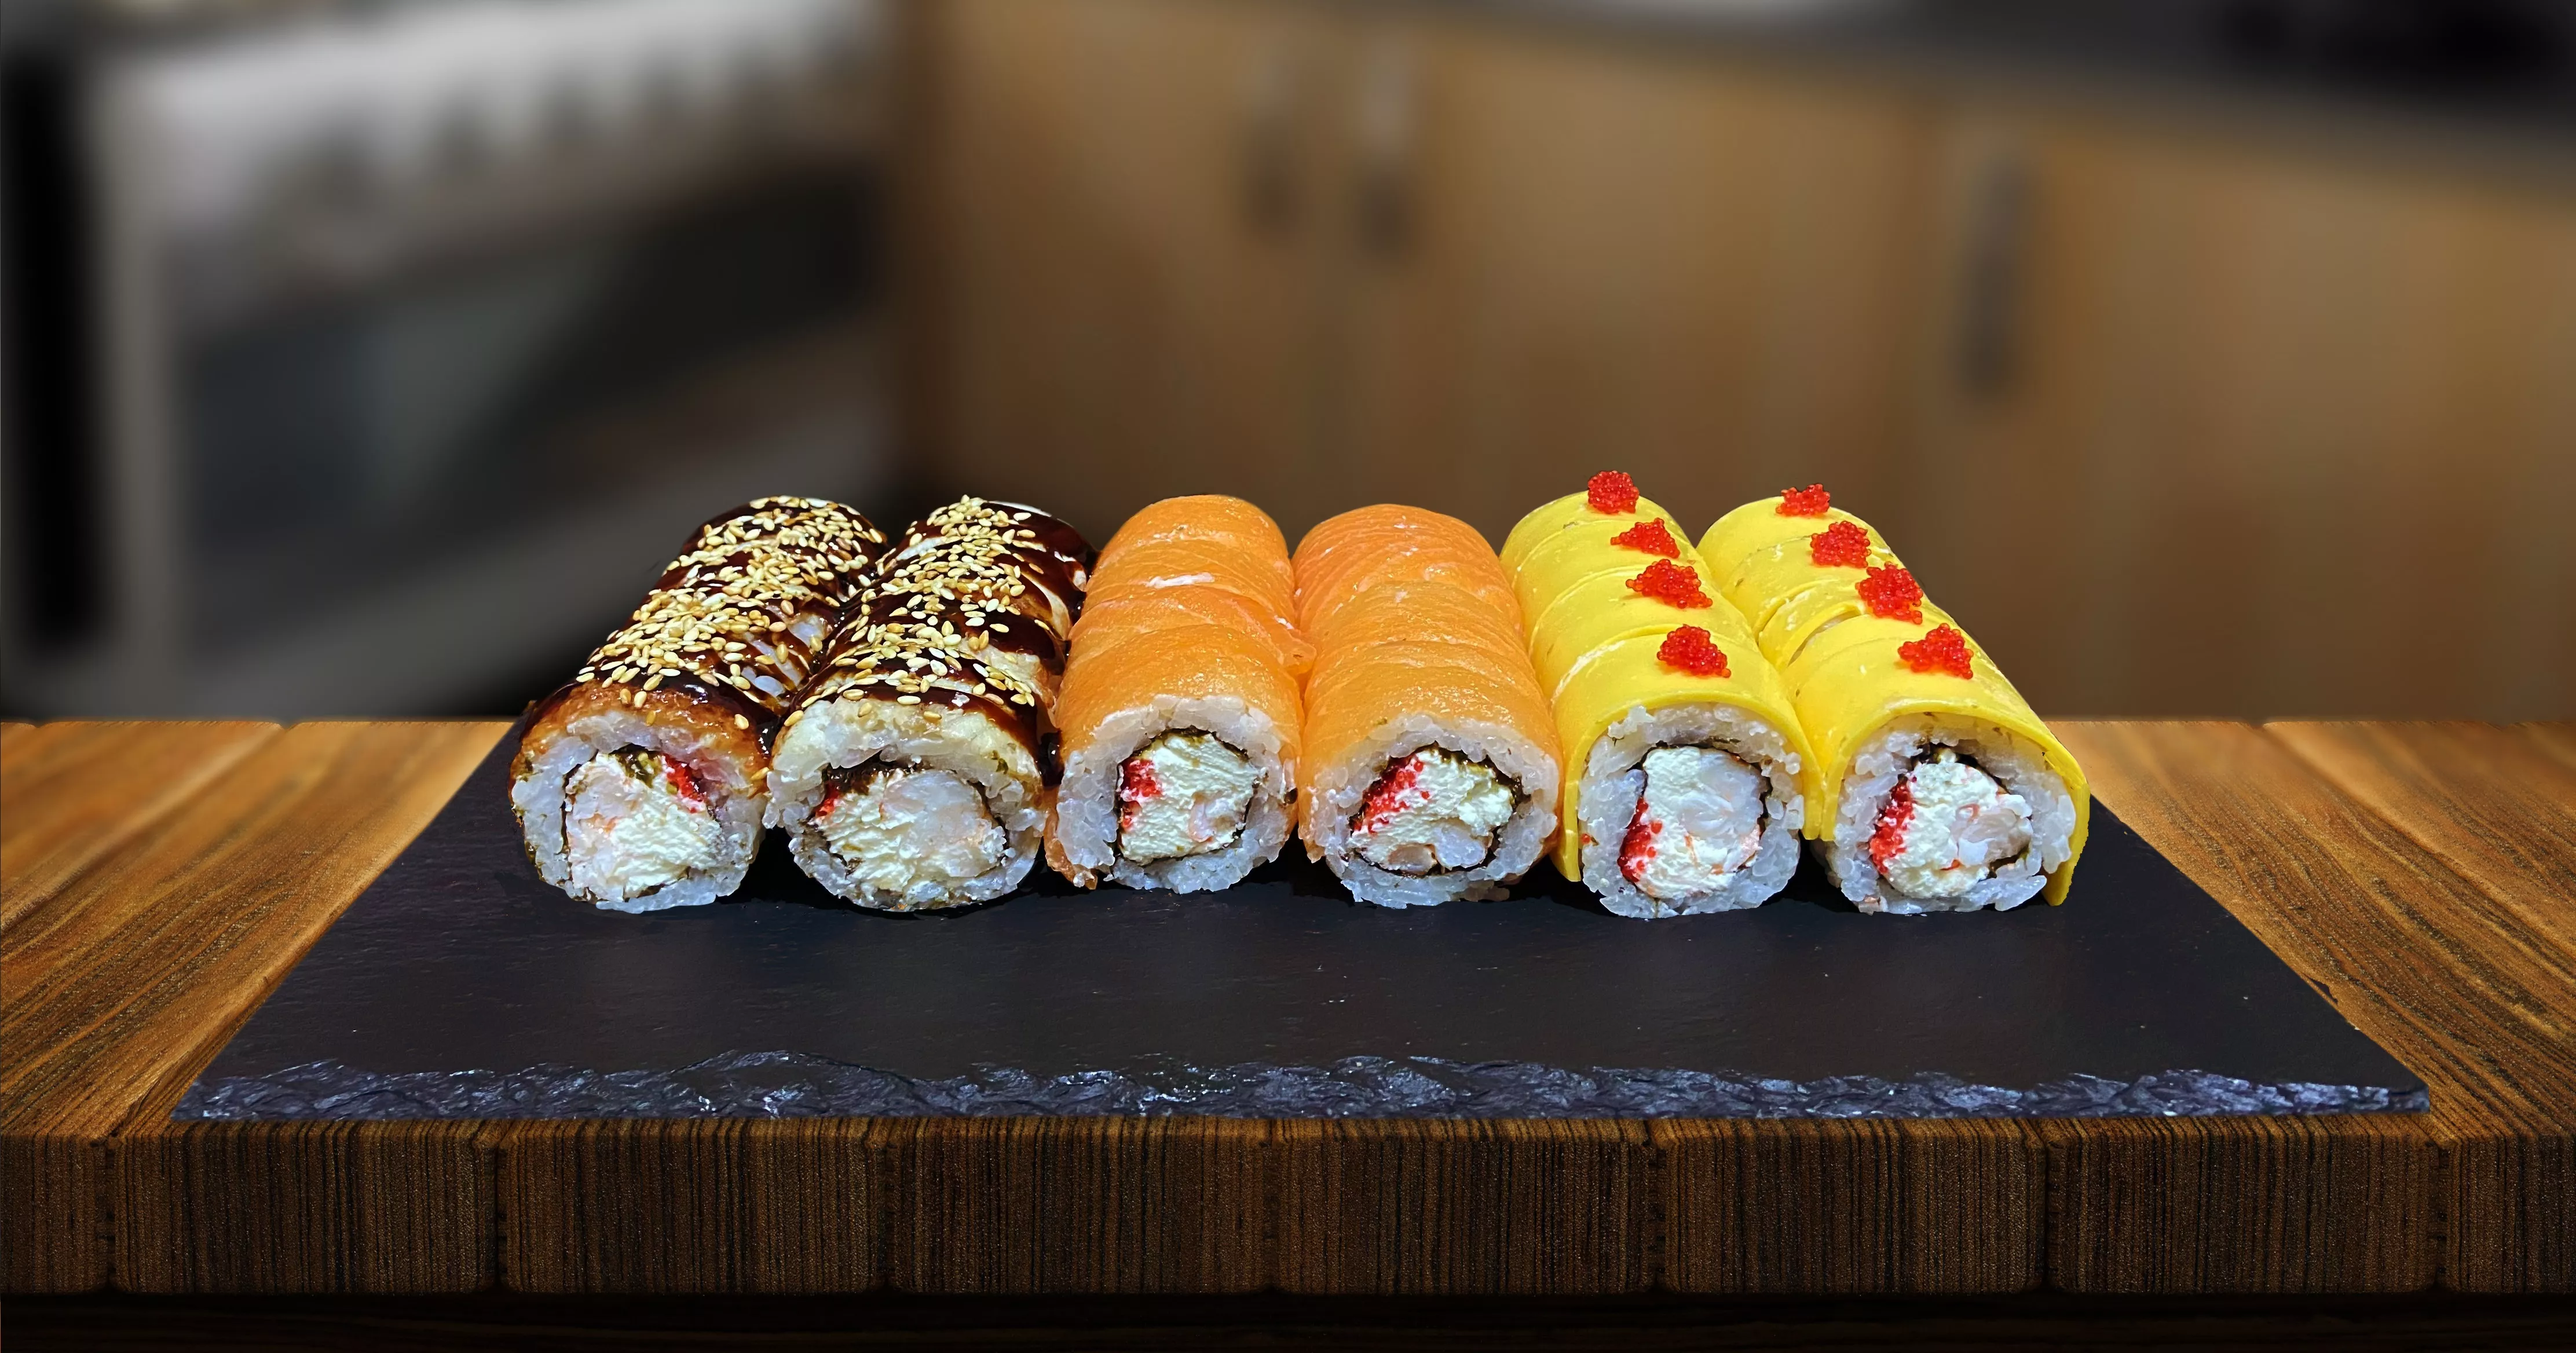 SushiClub Las Lenas in Argentina, South America | Bars - Rated 0.7